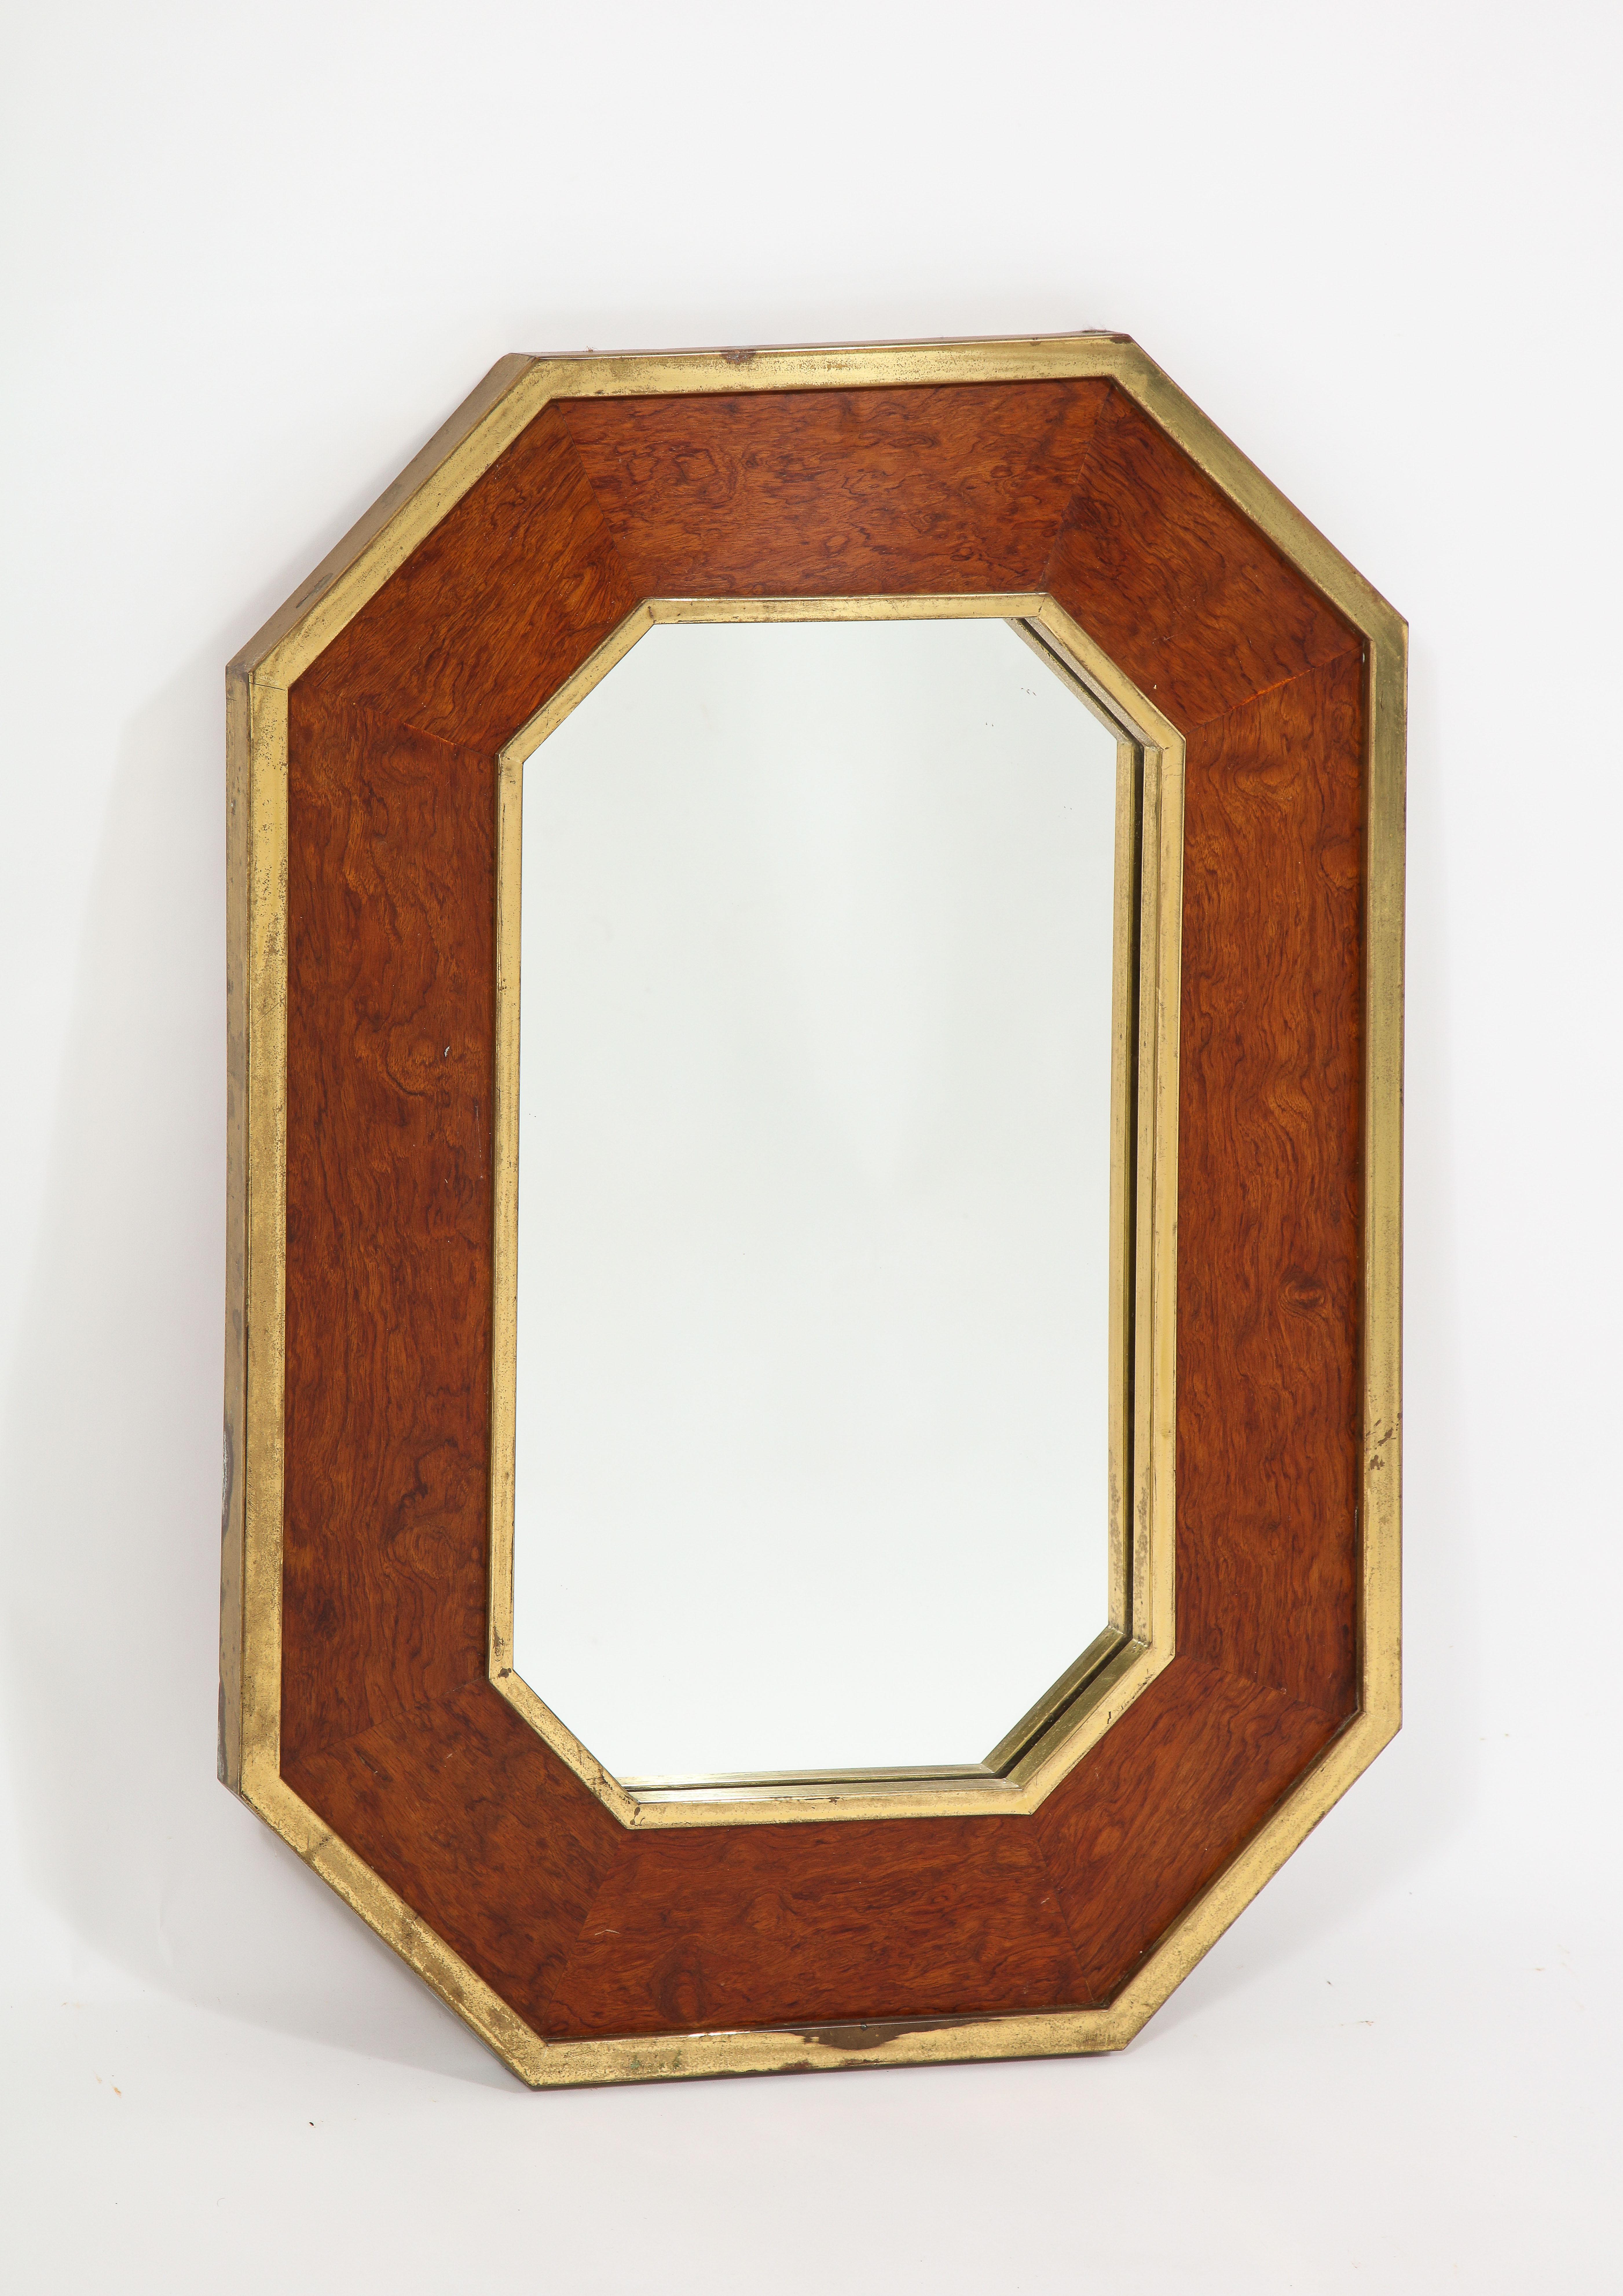 Burl and Brass Neoclassical Revival Octogonal Mirror, France 1960's For Sale 6